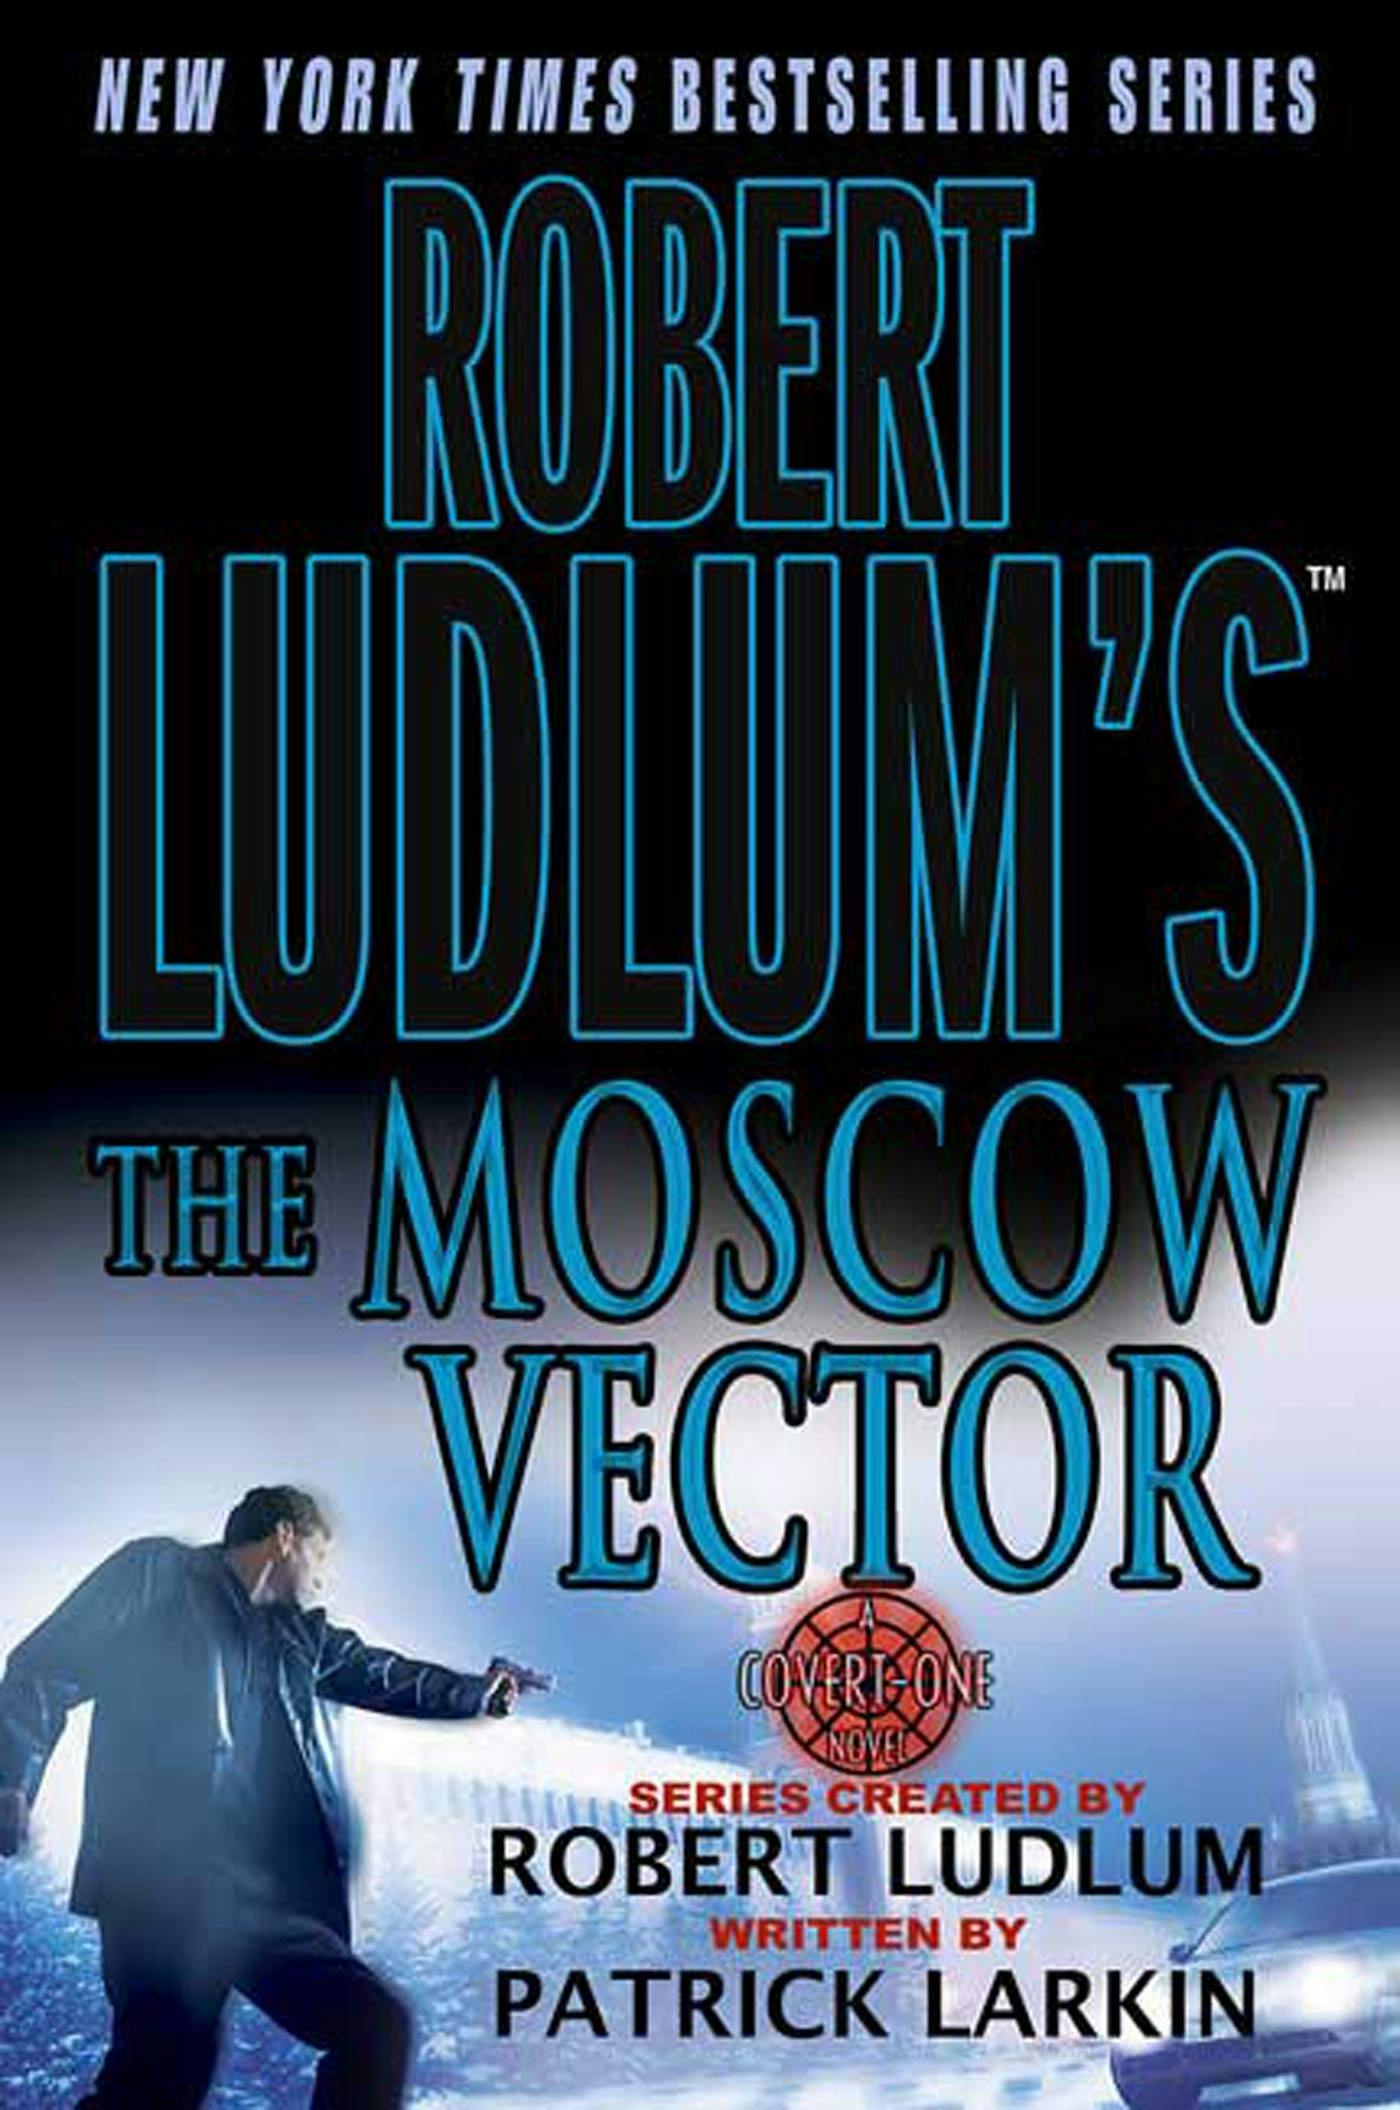 robert ludlum books in order they were published